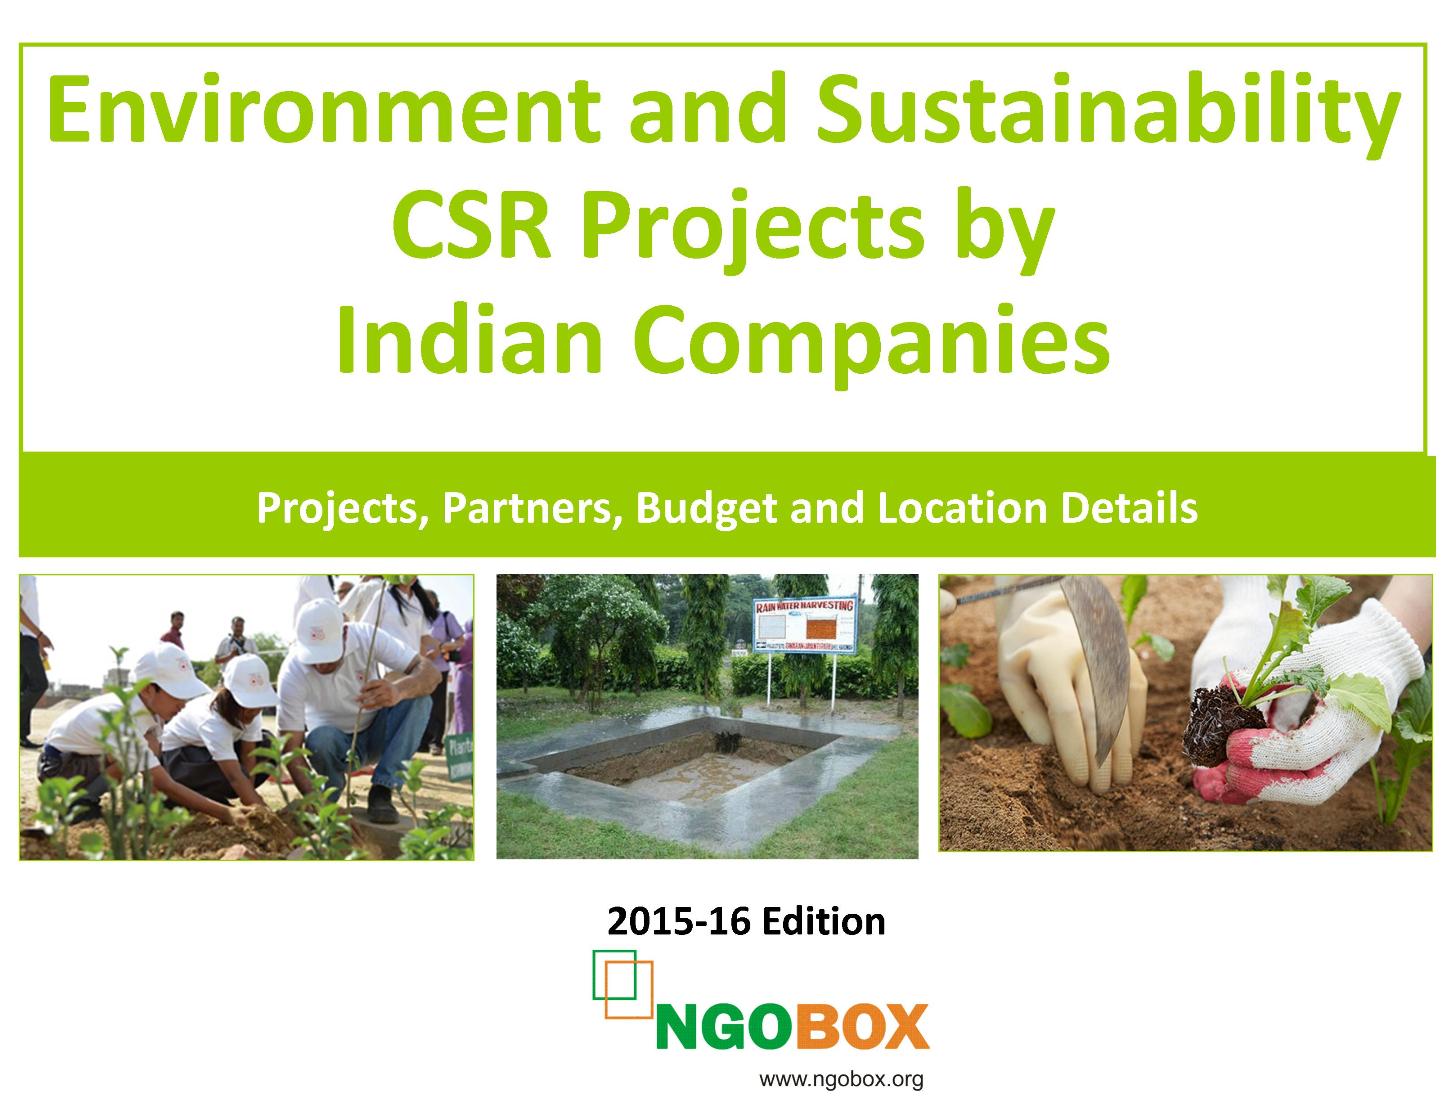 Environment and Sustainability CSR Projects by Indian Companies